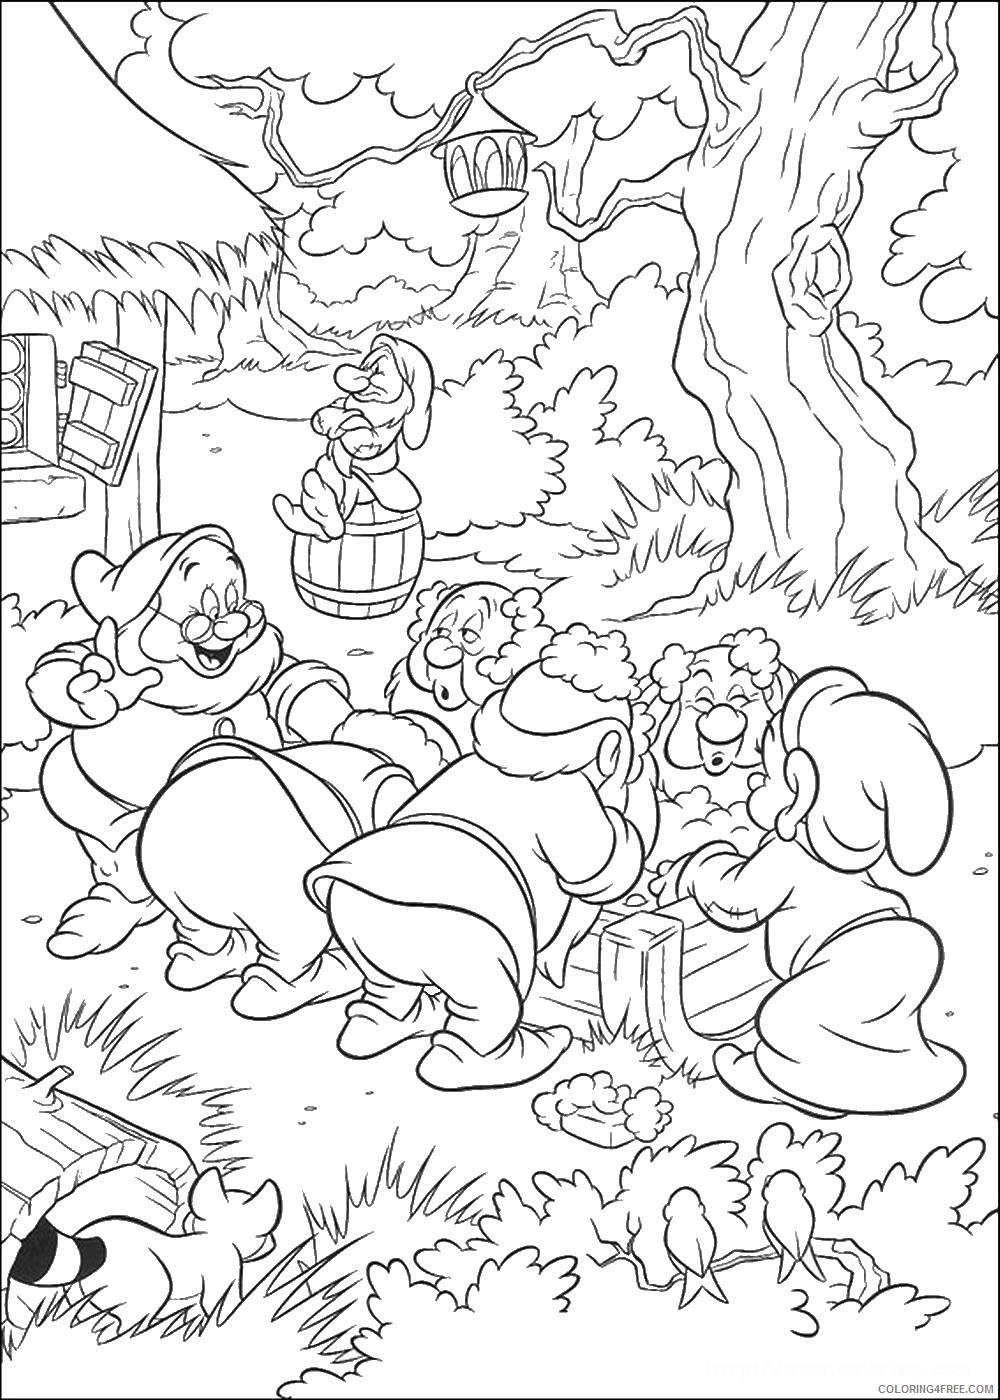 Snow White Coloring Pages Cartoons snow_white_cl_49 Printable 2020 5735 Coloring4free